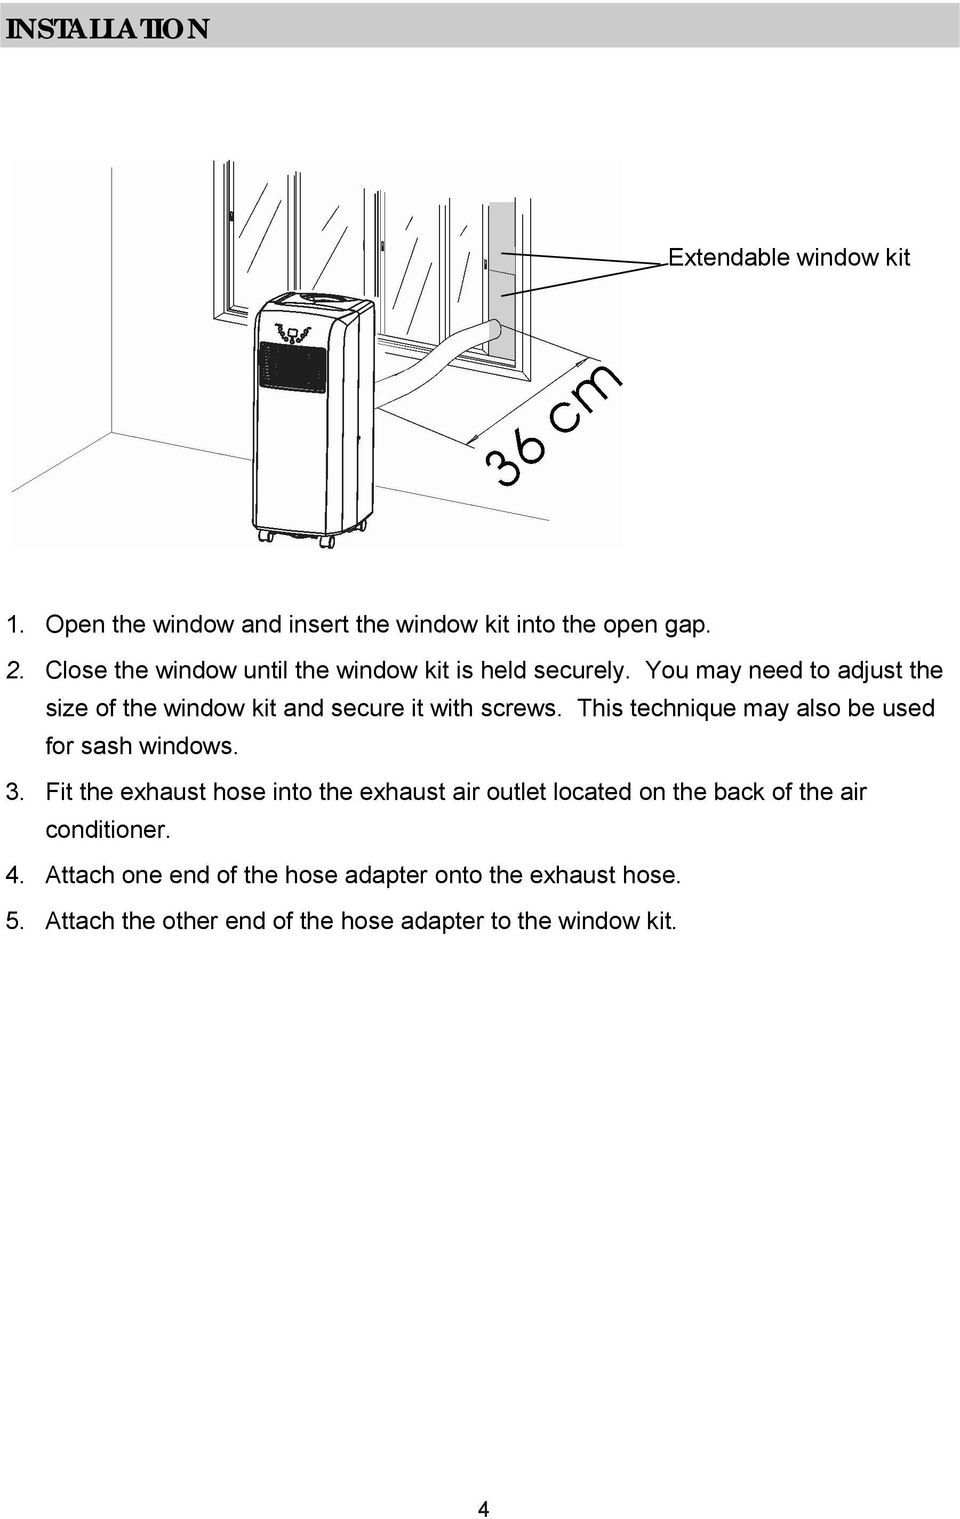 You may need to adjust the size of the window kit and secure it with screws. This technique may also be used for sash windows.